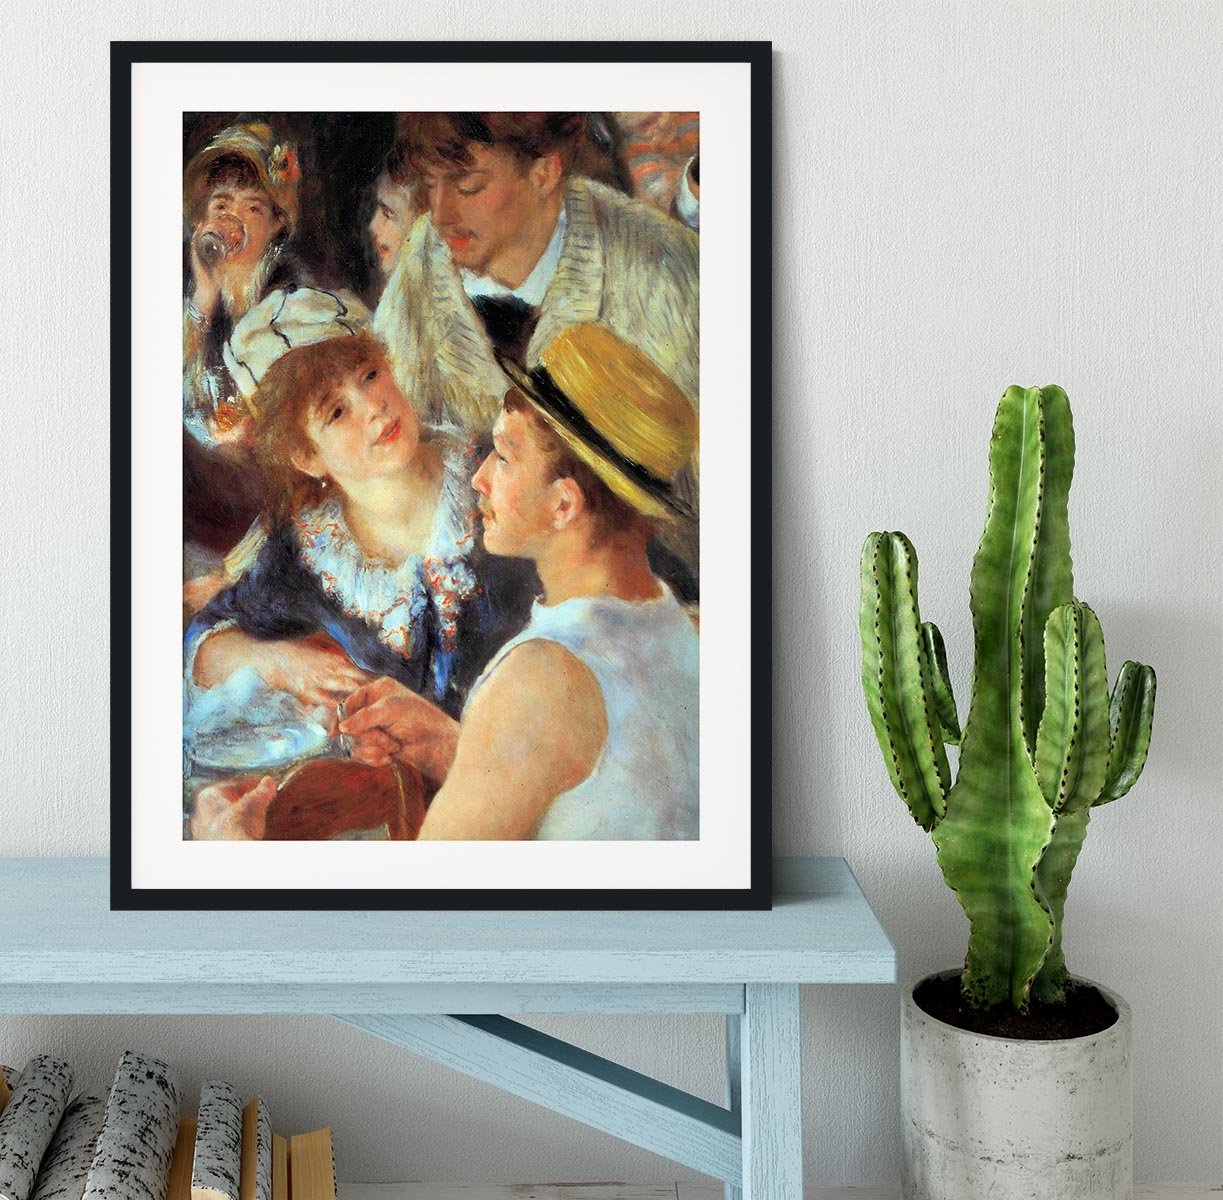 Lunch on the boat party detail by Renoir Framed Print - Canvas Art Rocks - 1